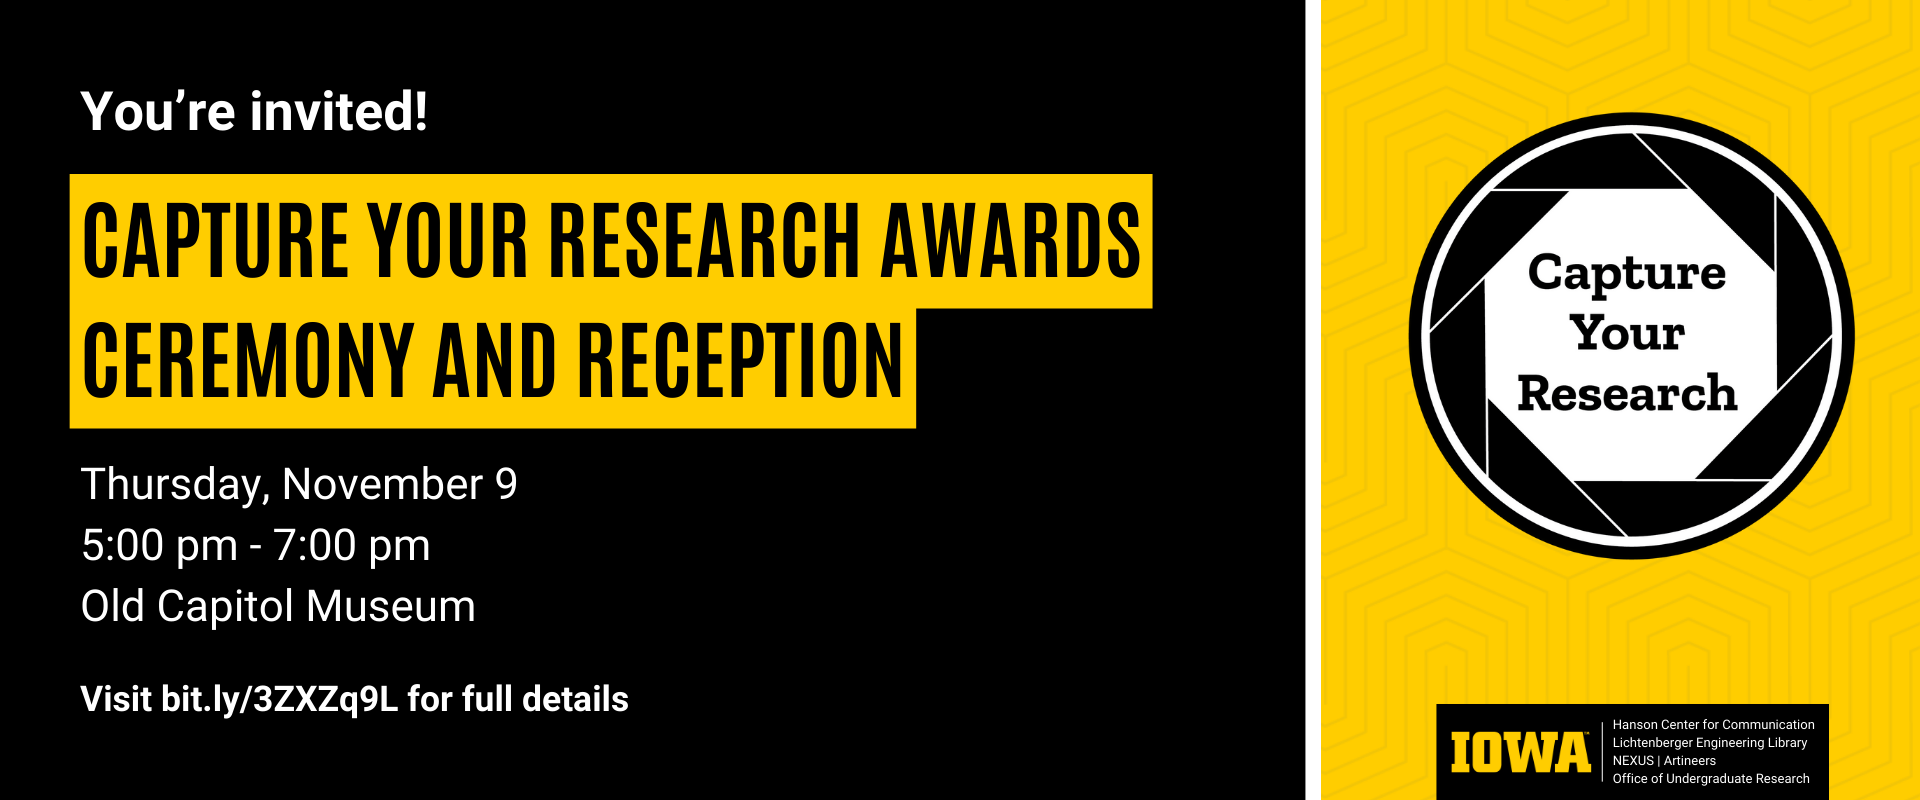 Capture Your Research Awards Ceremony and Reception